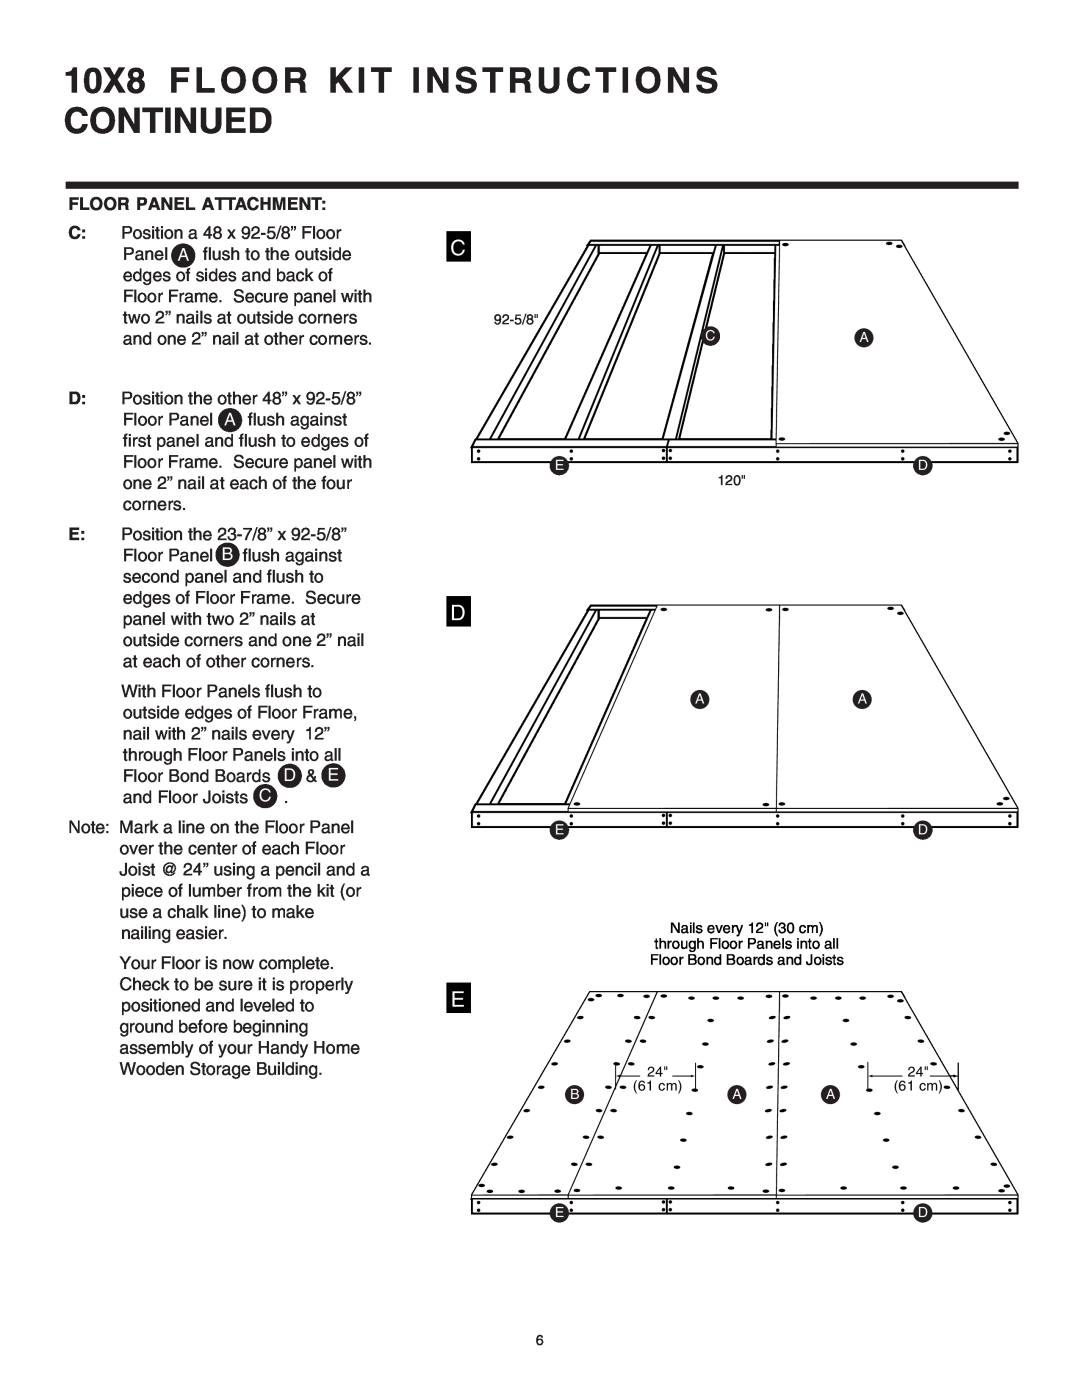 Husky 16628 instruction manual 10X8 FLOOR KIT INSTRUCTIONS CONTINUED, Floor Panel Attachment 